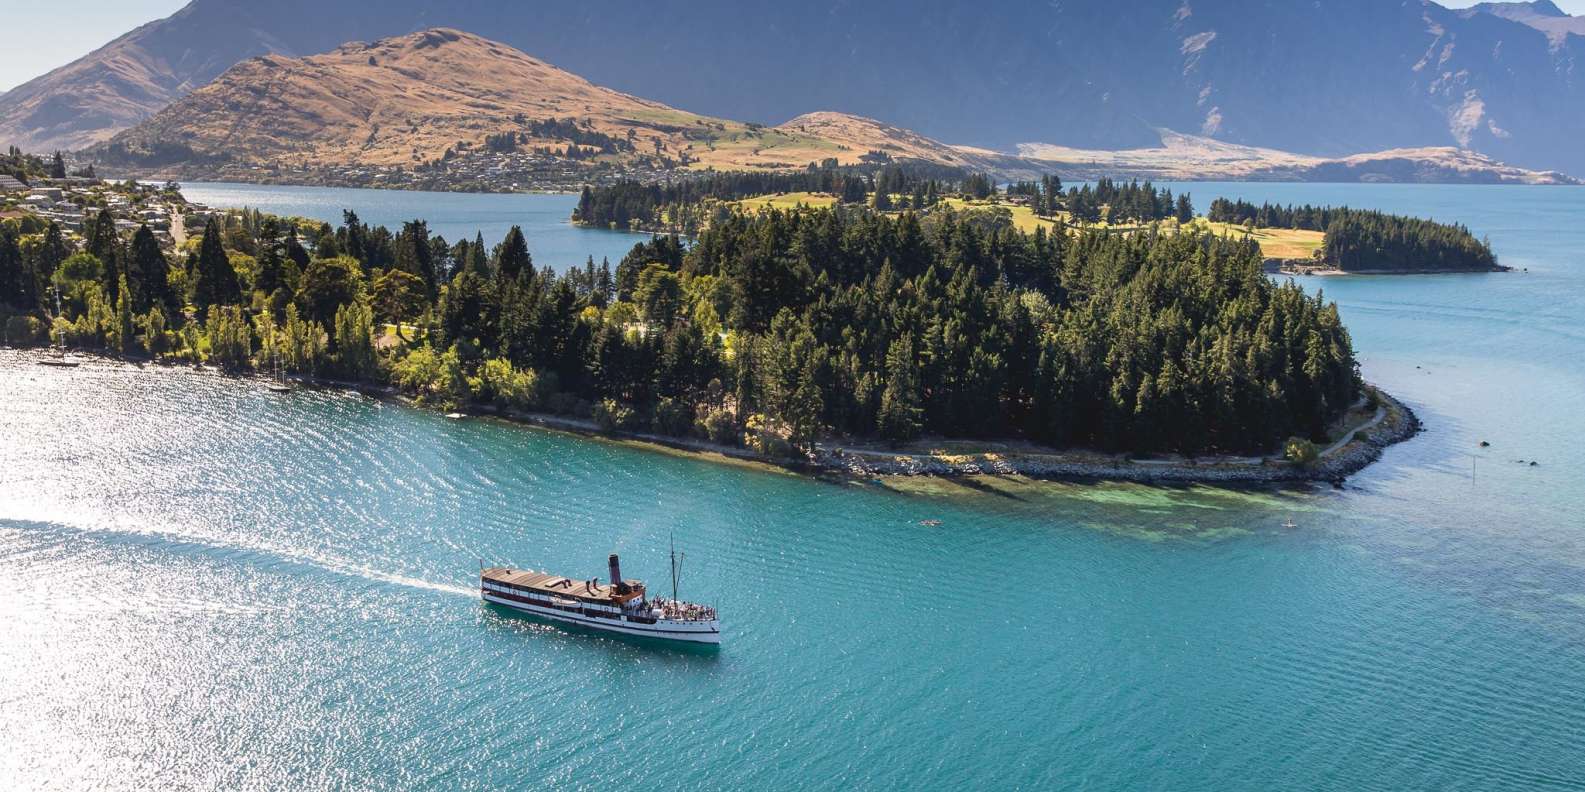 What to do in Queenstown